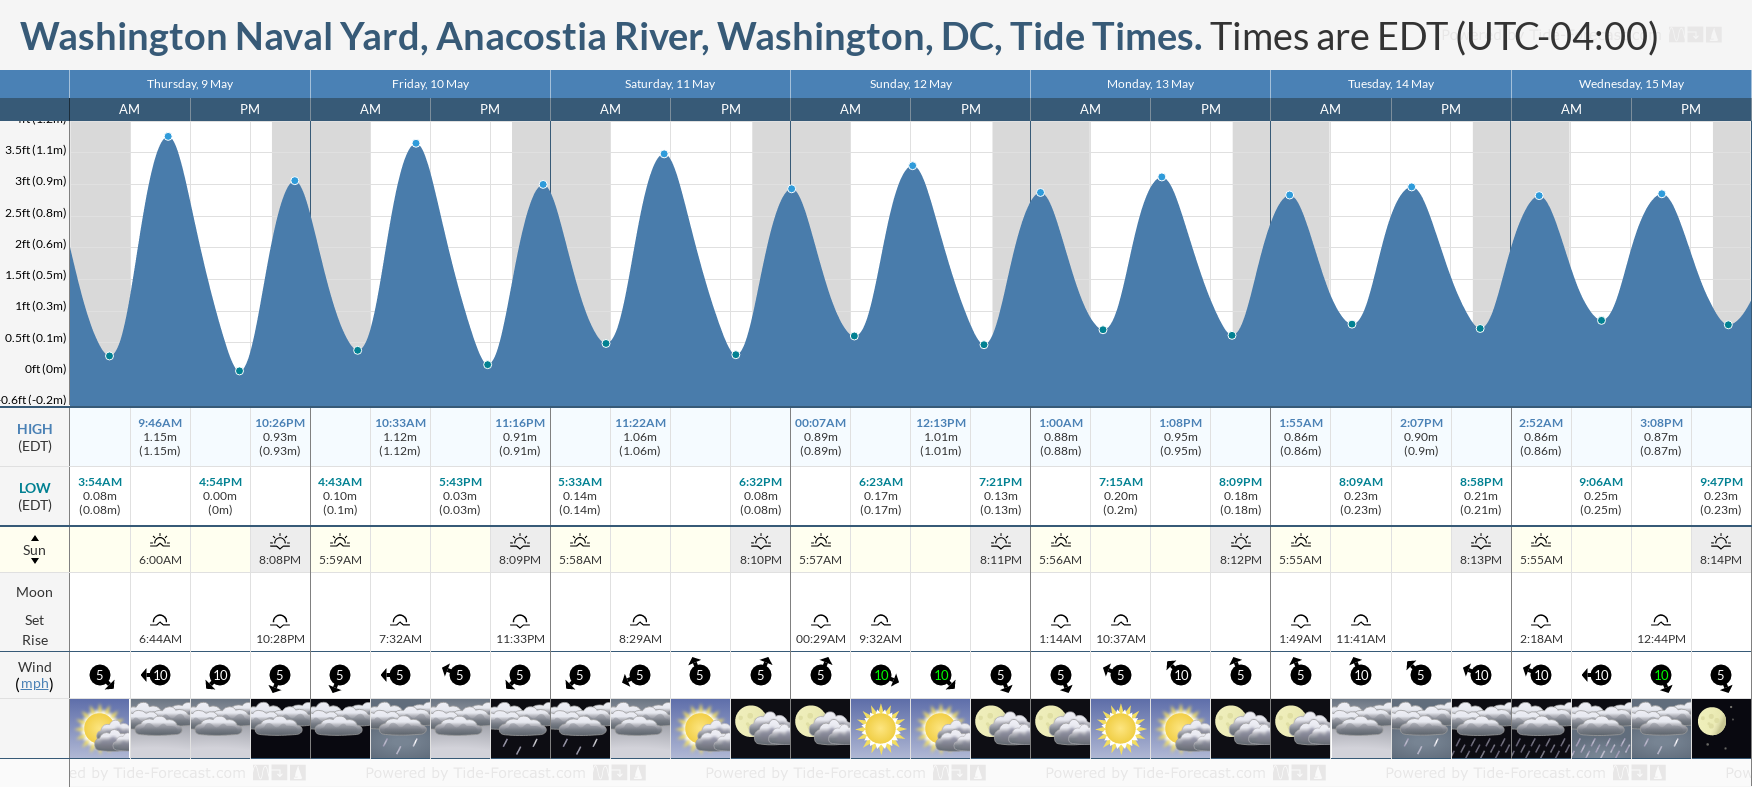 Washington Naval Yard, Anacostia River, Washington, DC Tide Chart including high and low tide times for the next 7 days